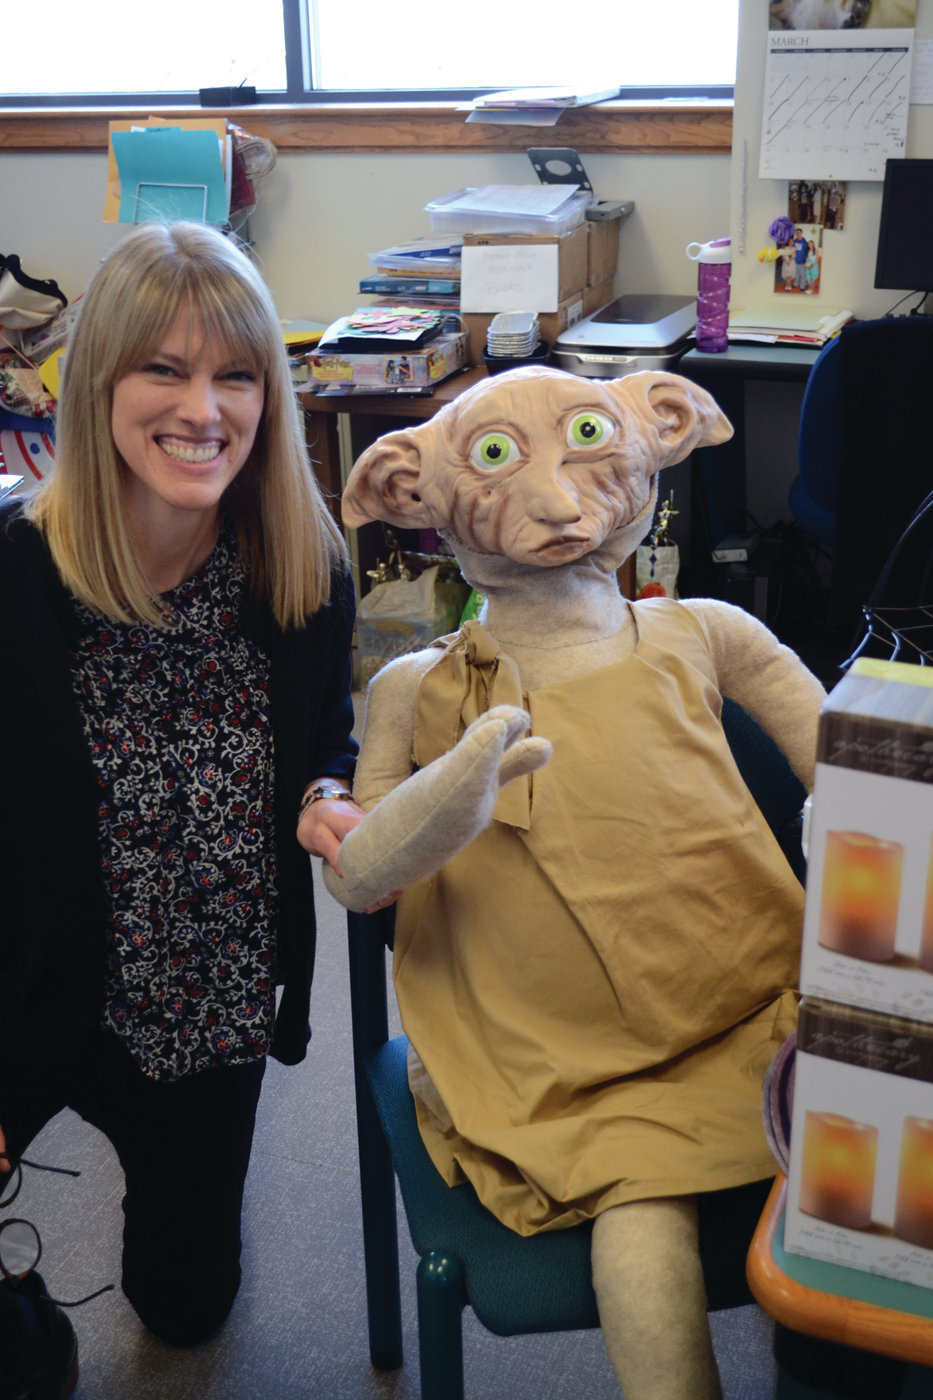 MEET NEW FRIENDS: Ellen O’Brien, coordinator of Children’s Services for the Warwick Public Library, poses with Dobby the House Elf, a central character from the Harry Potter series.